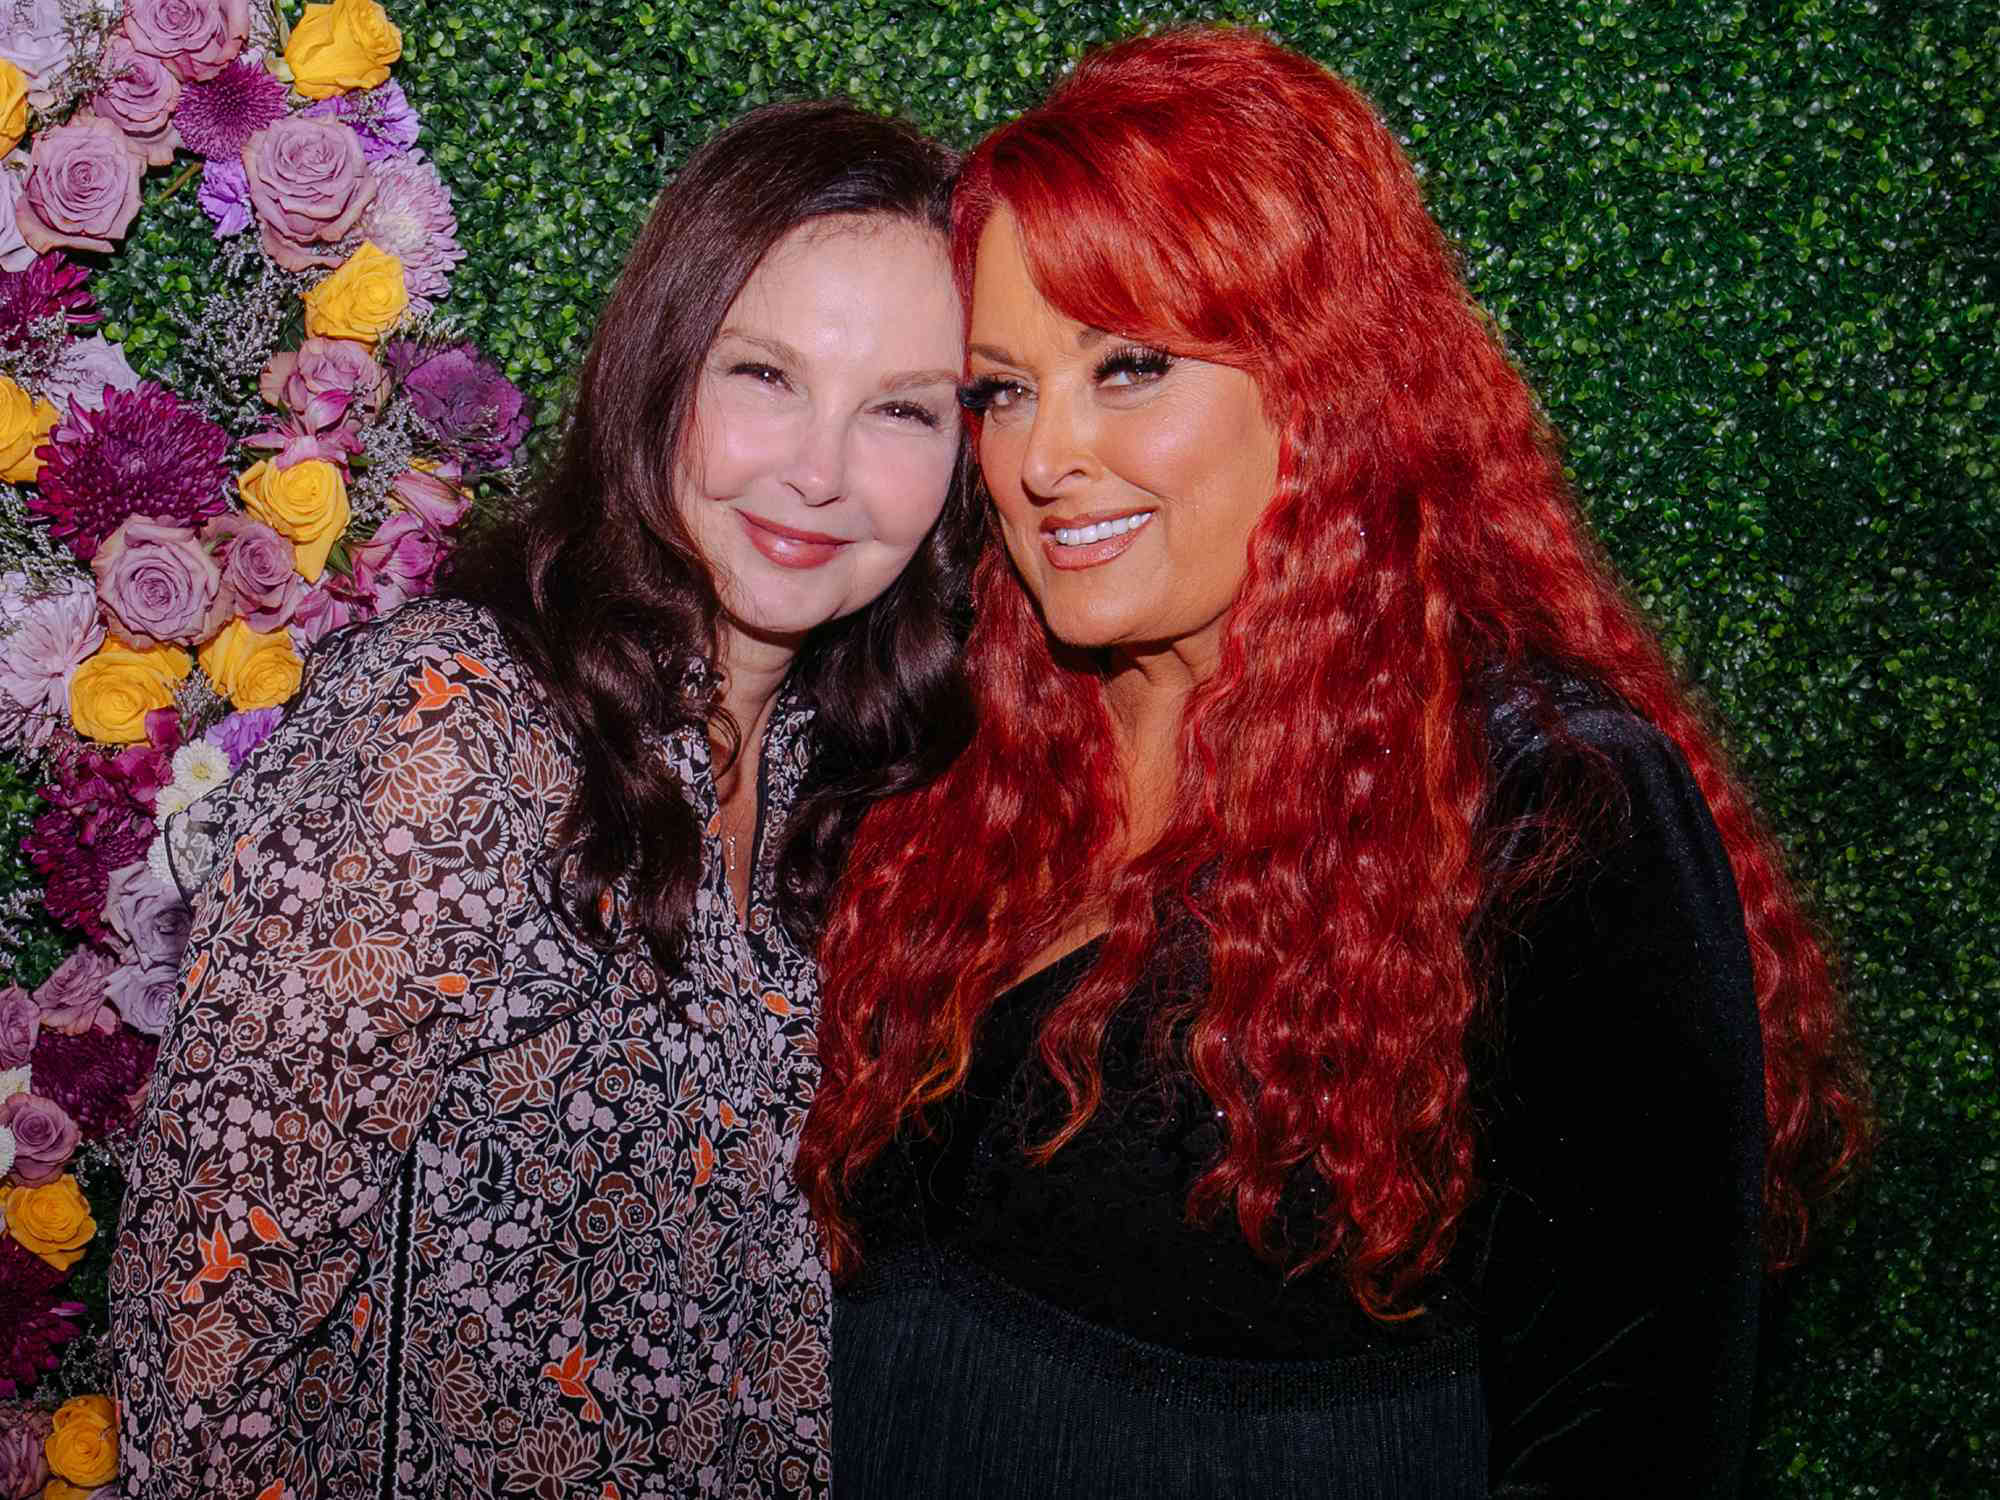 Wynonna Judd And Ashley Judd All About The Famous Sisters And Their Sibling Bond 